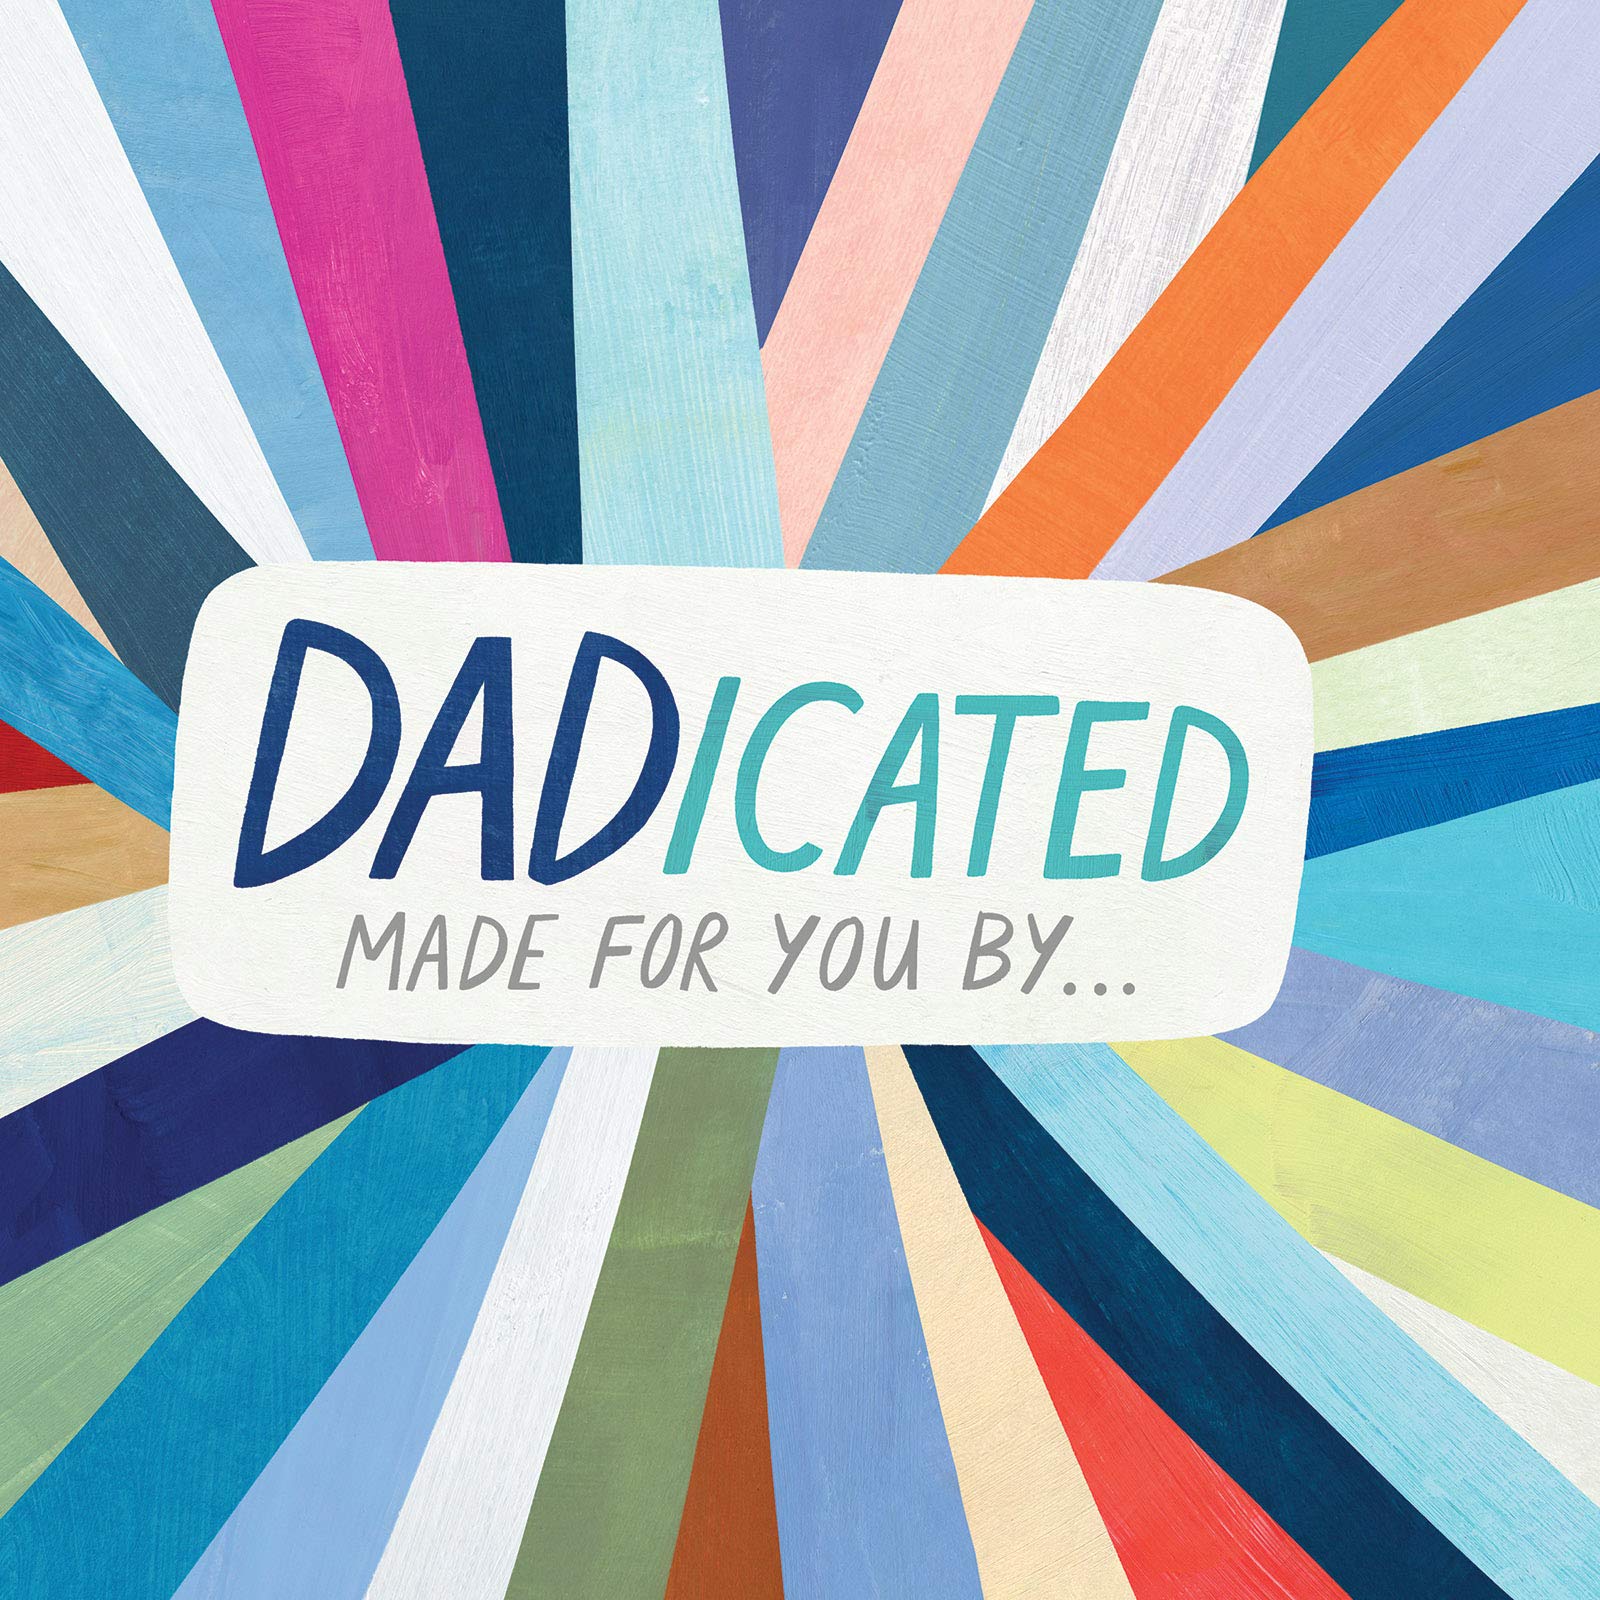 DADicated Made For You By...